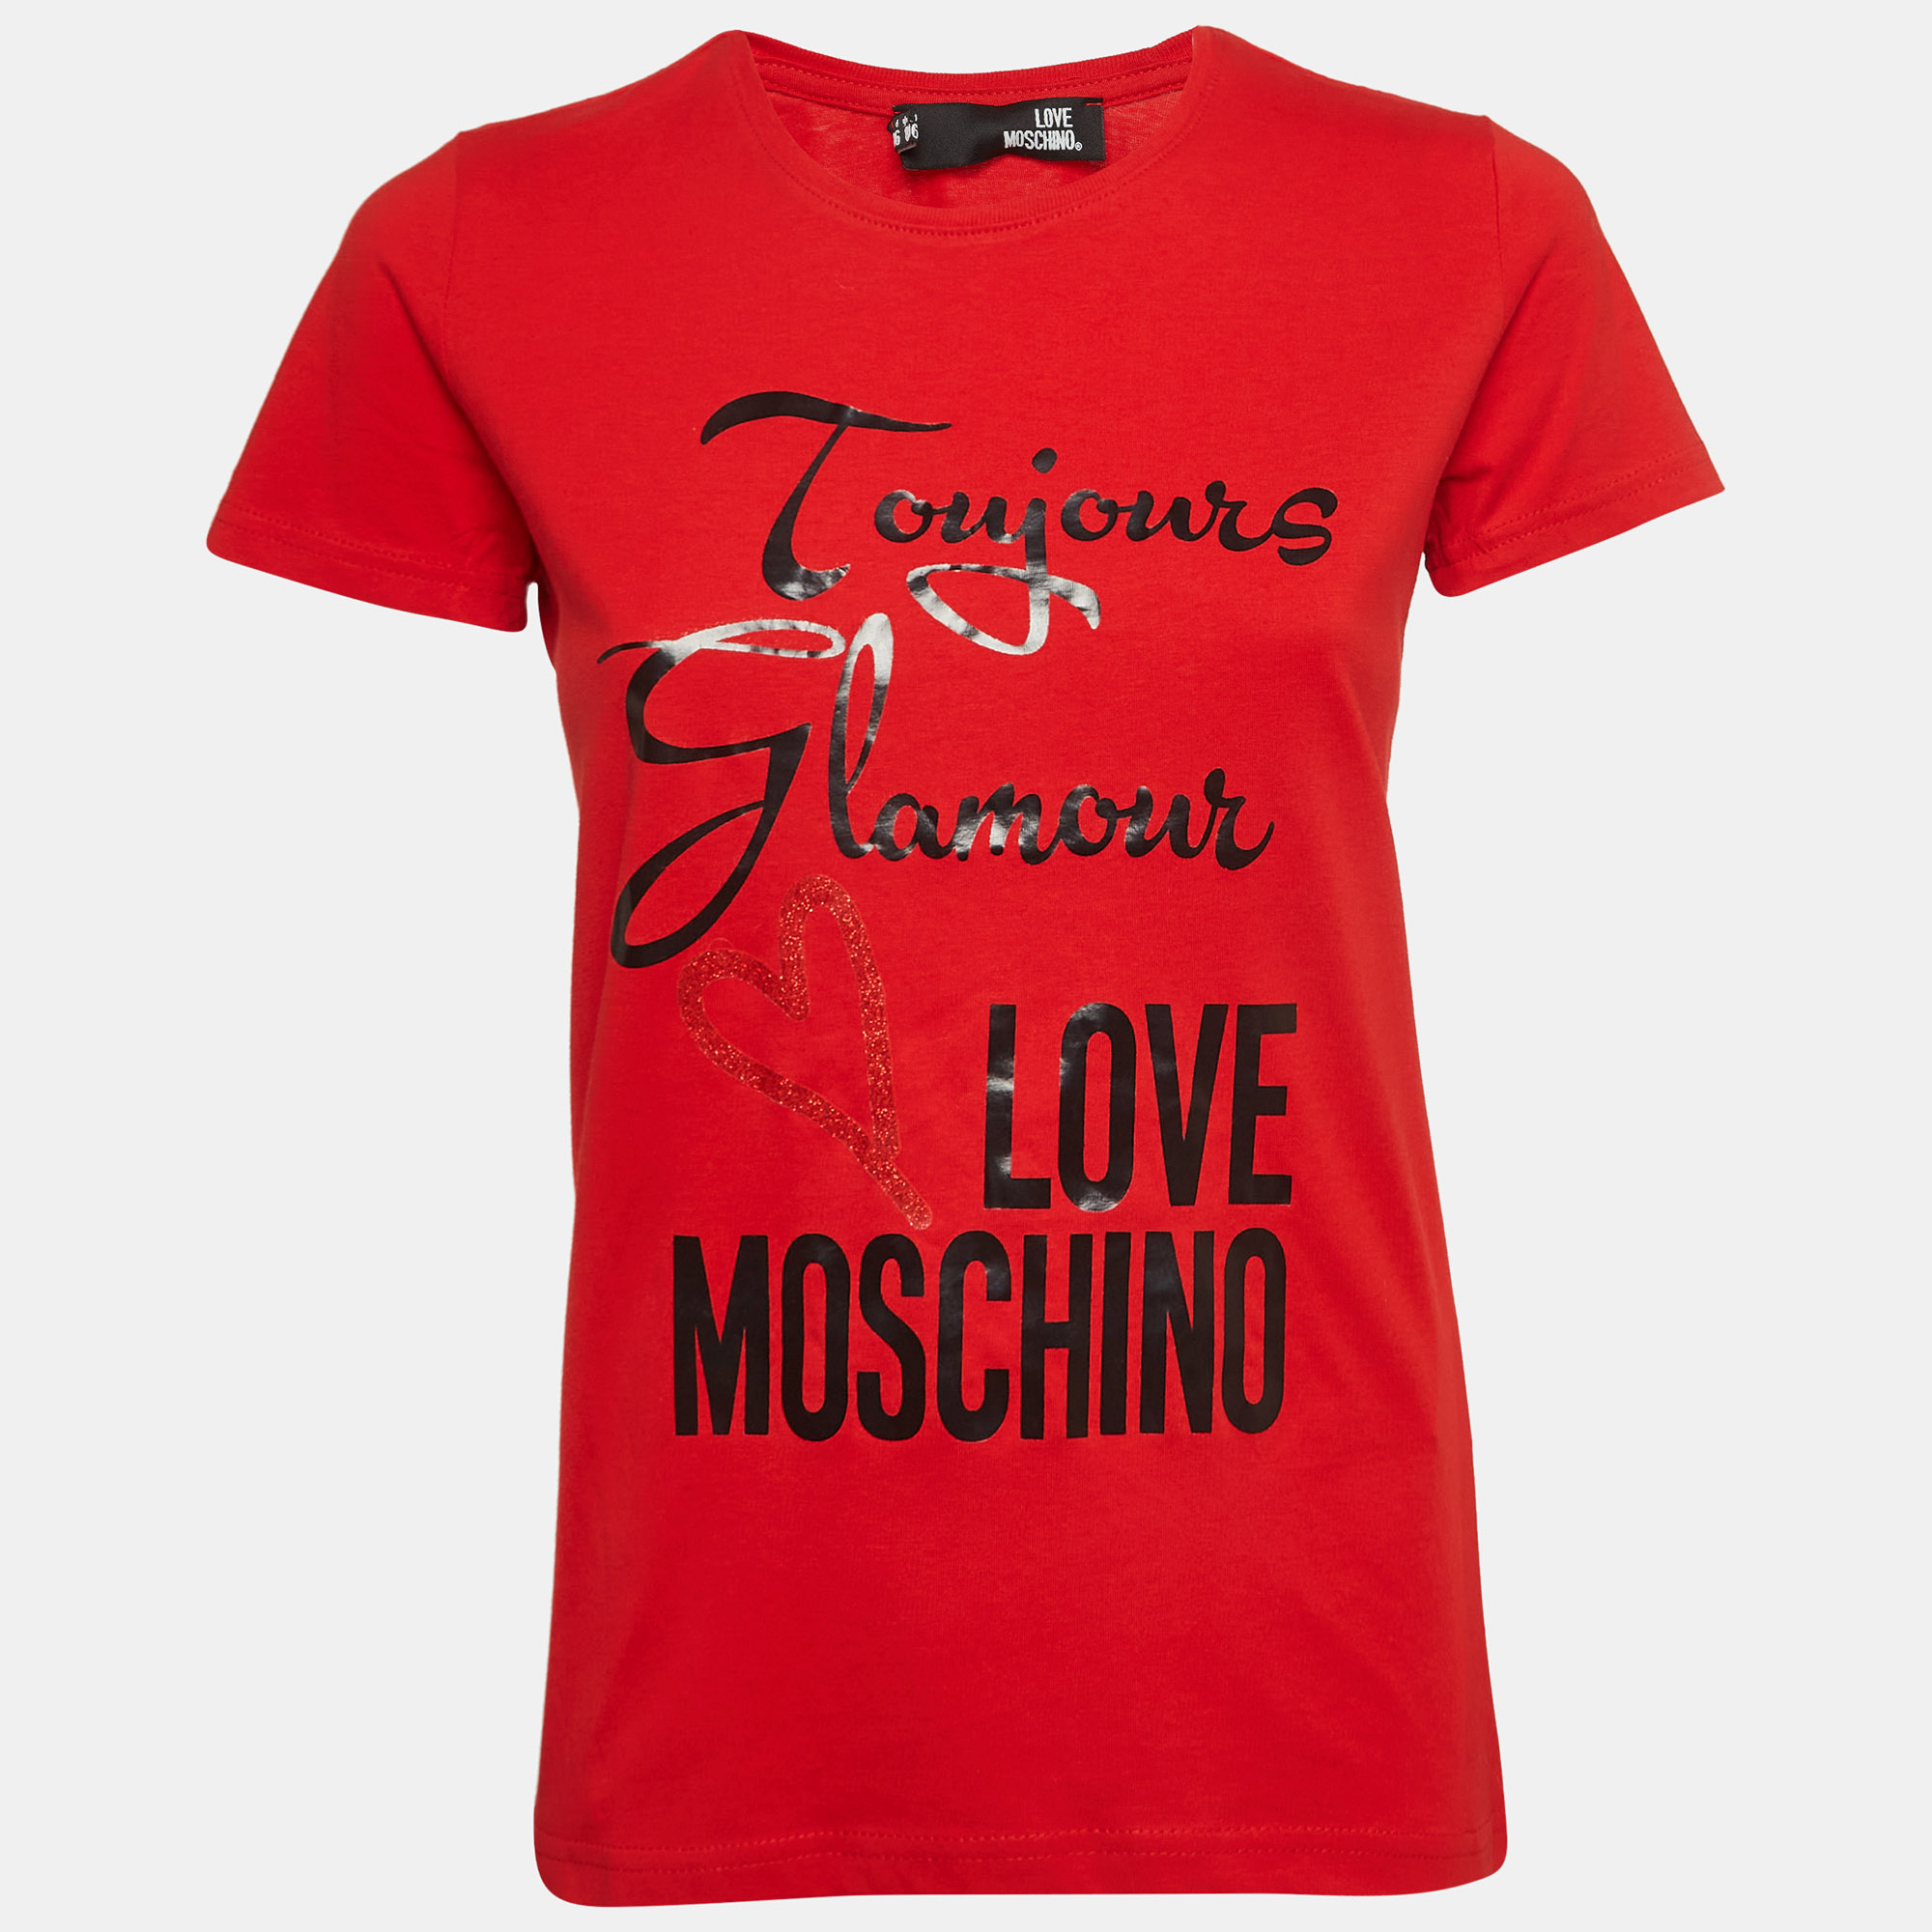 Love moschino red printed cotton knit crew neck t-shirt s